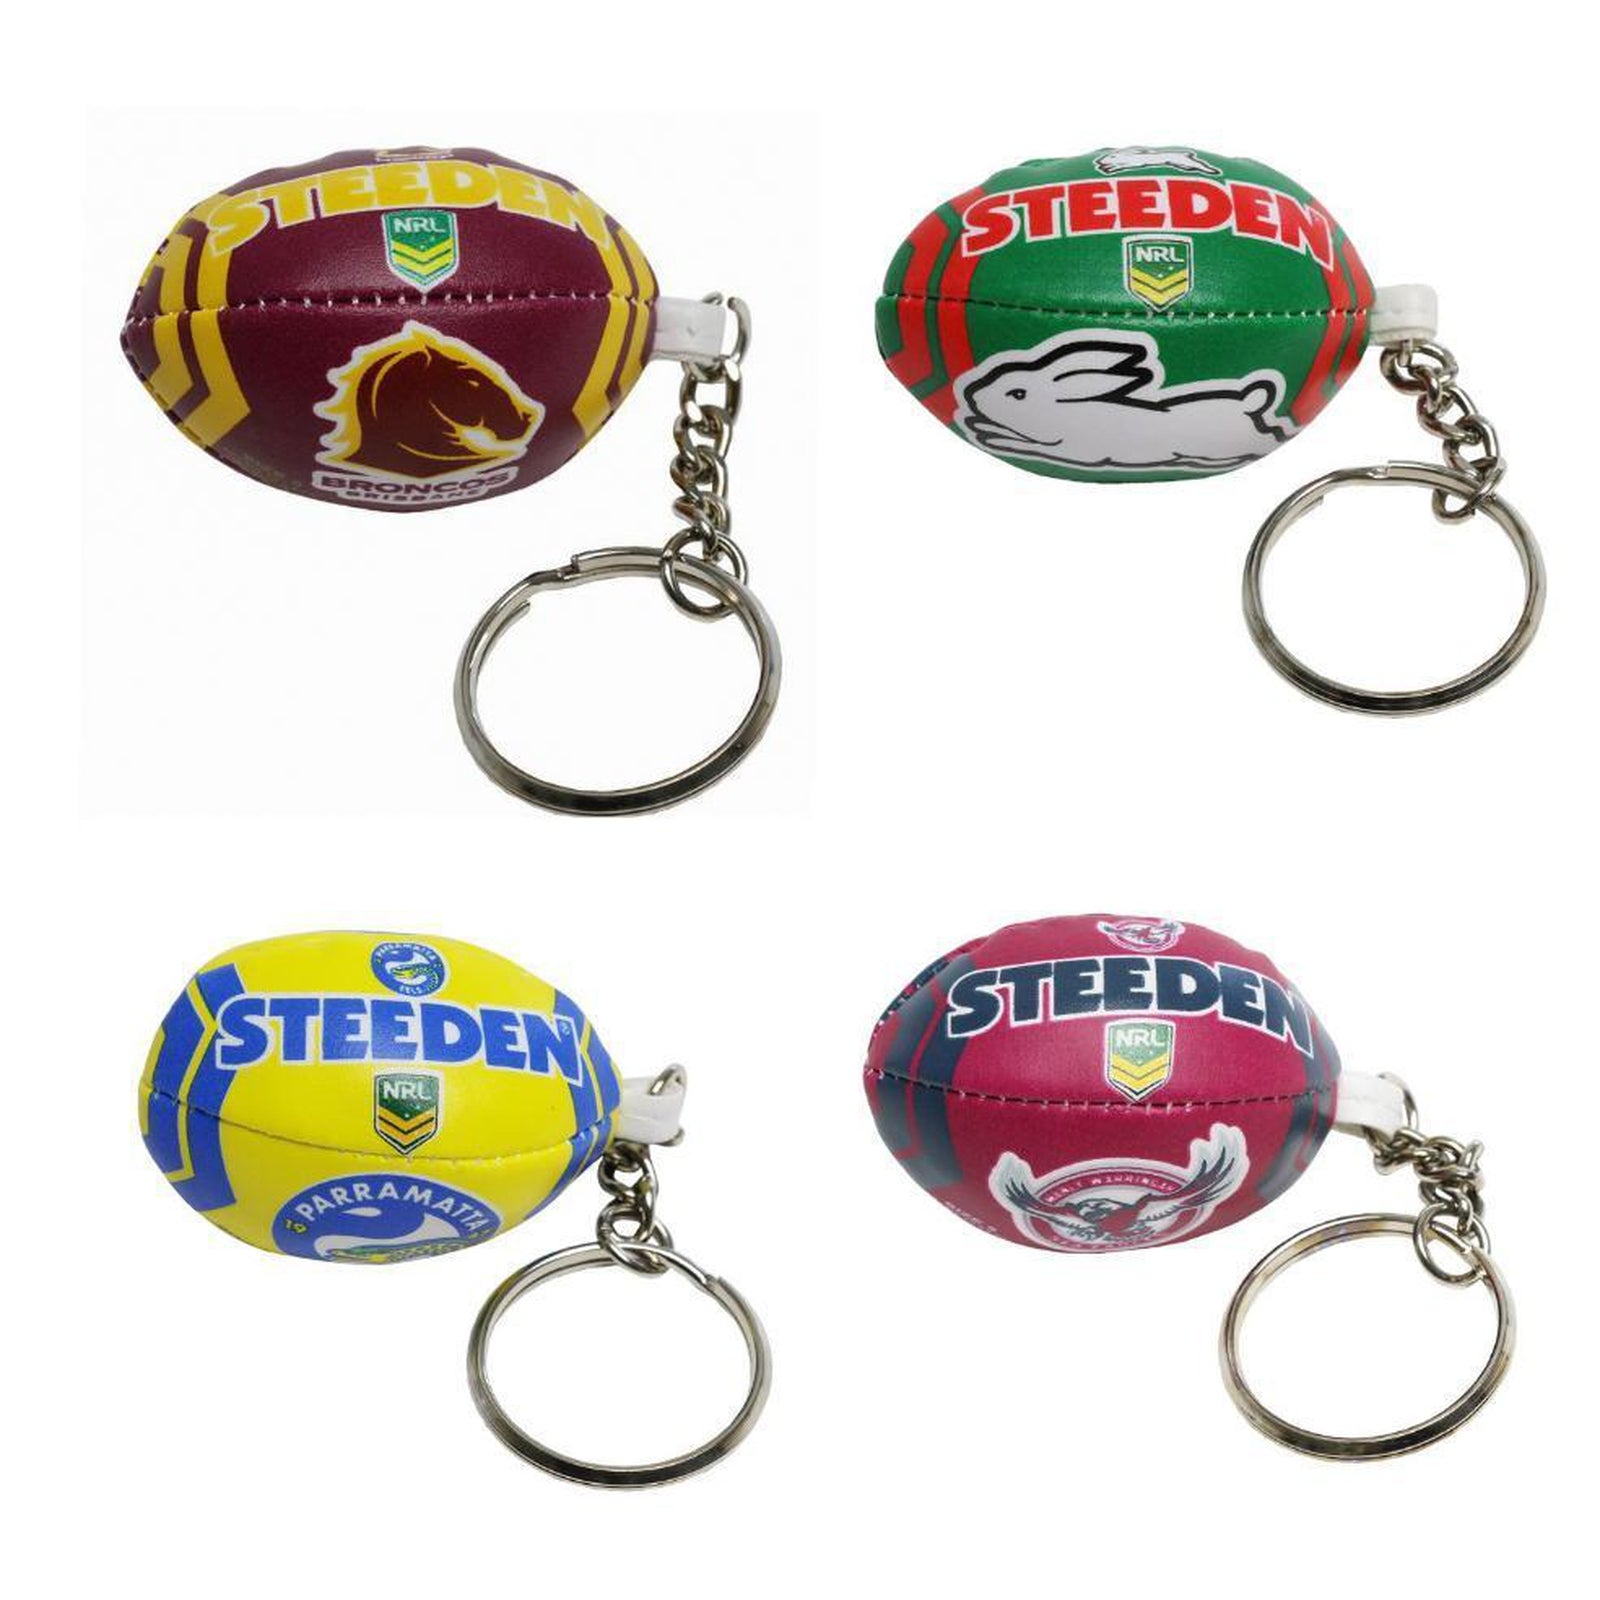 Penrith Panthers NRL Key Ring Rugby League Rubber Keyring 